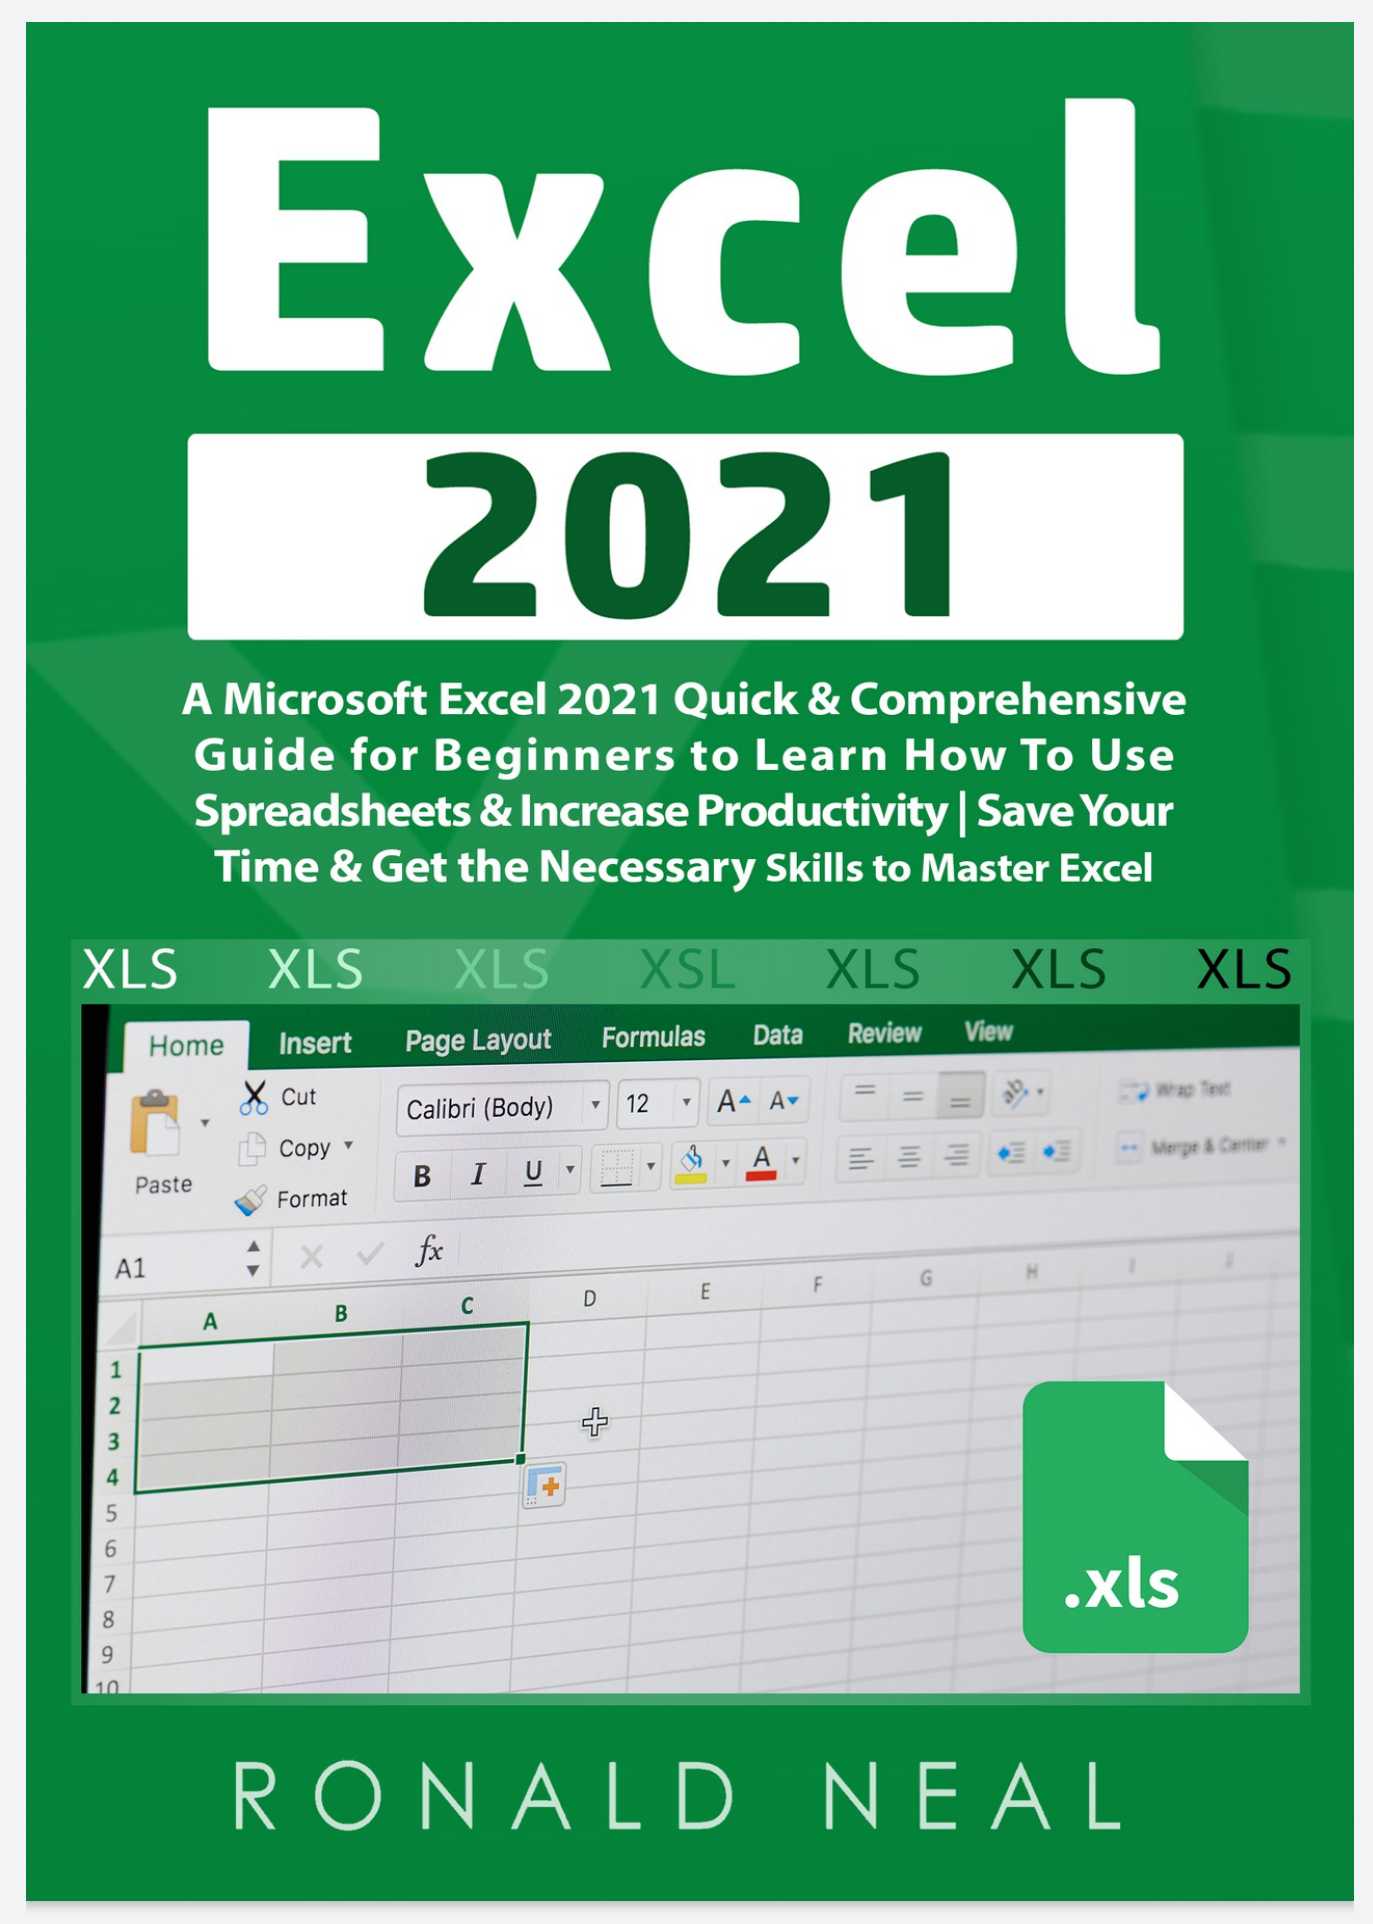 Excel 2021: A Microsoft Excel 2021 Quick & Comprehensive Guide for Beginners to Learn How To Use Spreadsheets & Increase Productivity